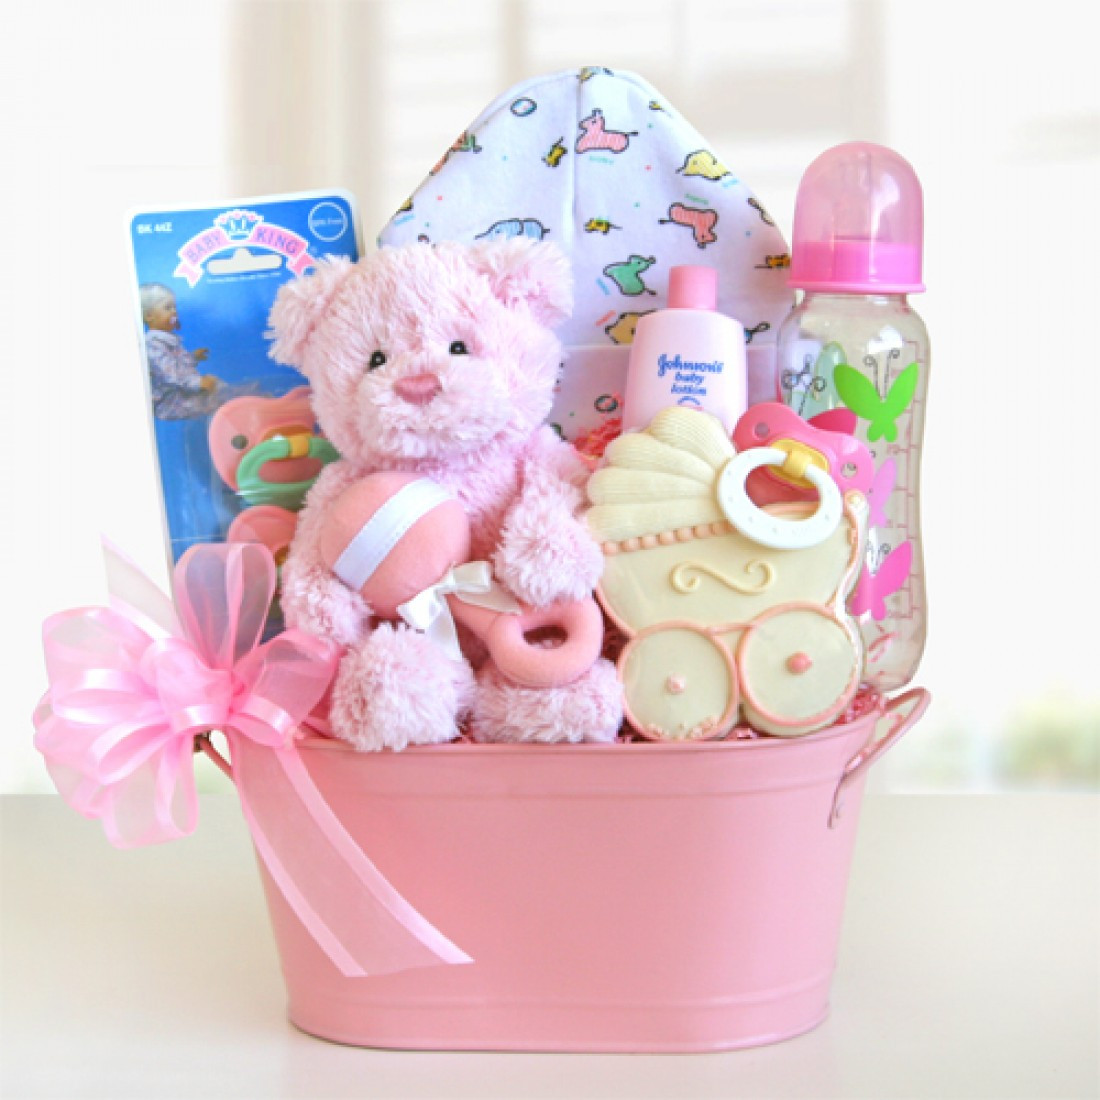 Gift Basket For Baby
 Cute Package New Baby Gift Baskets